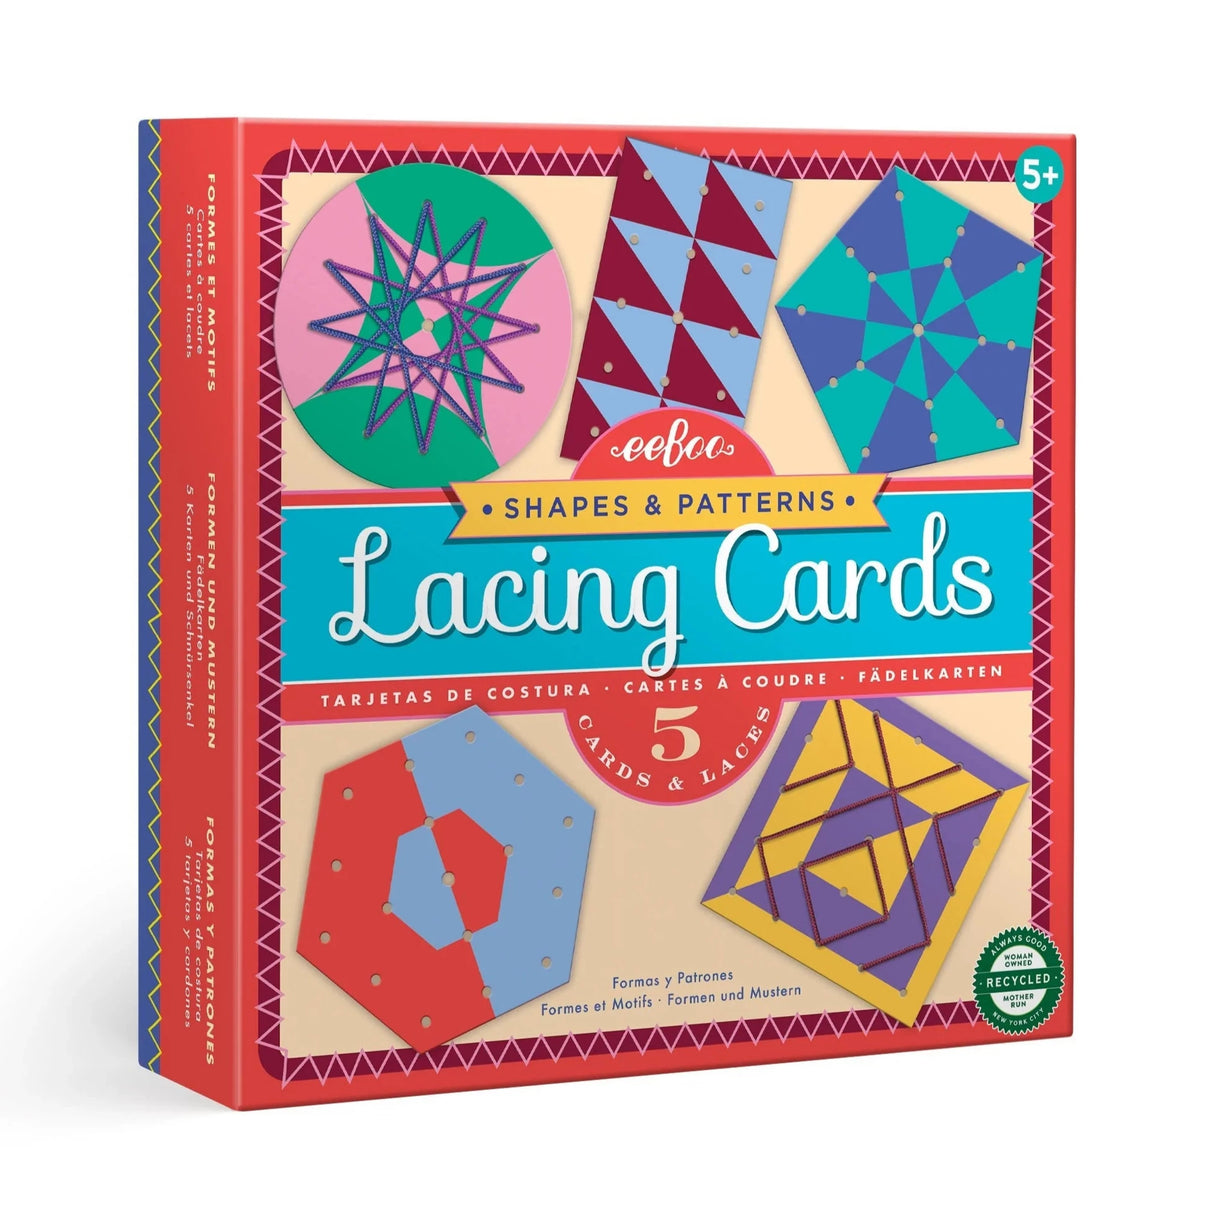 Lacing Cards Shapes & Patterns